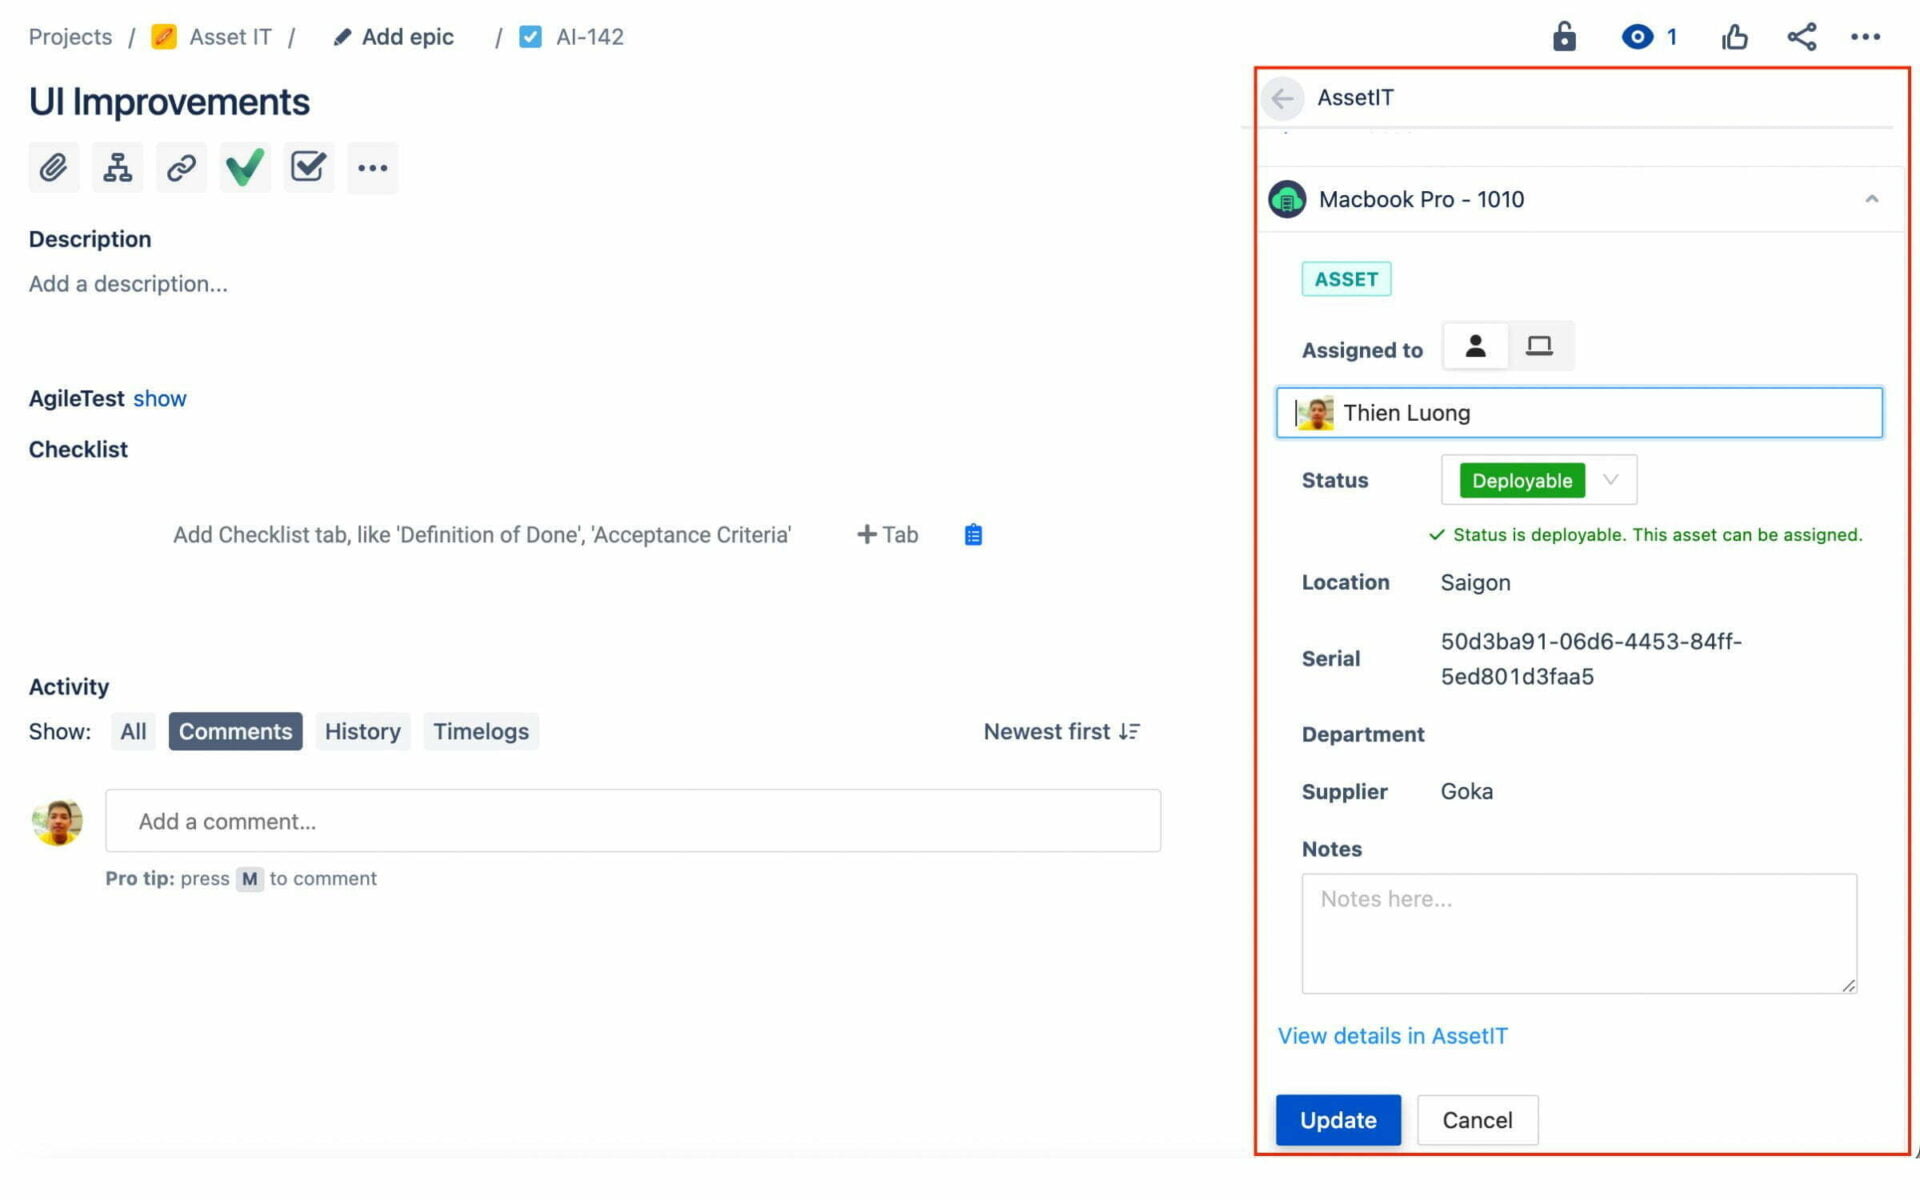 Link Assets with Jira Issue